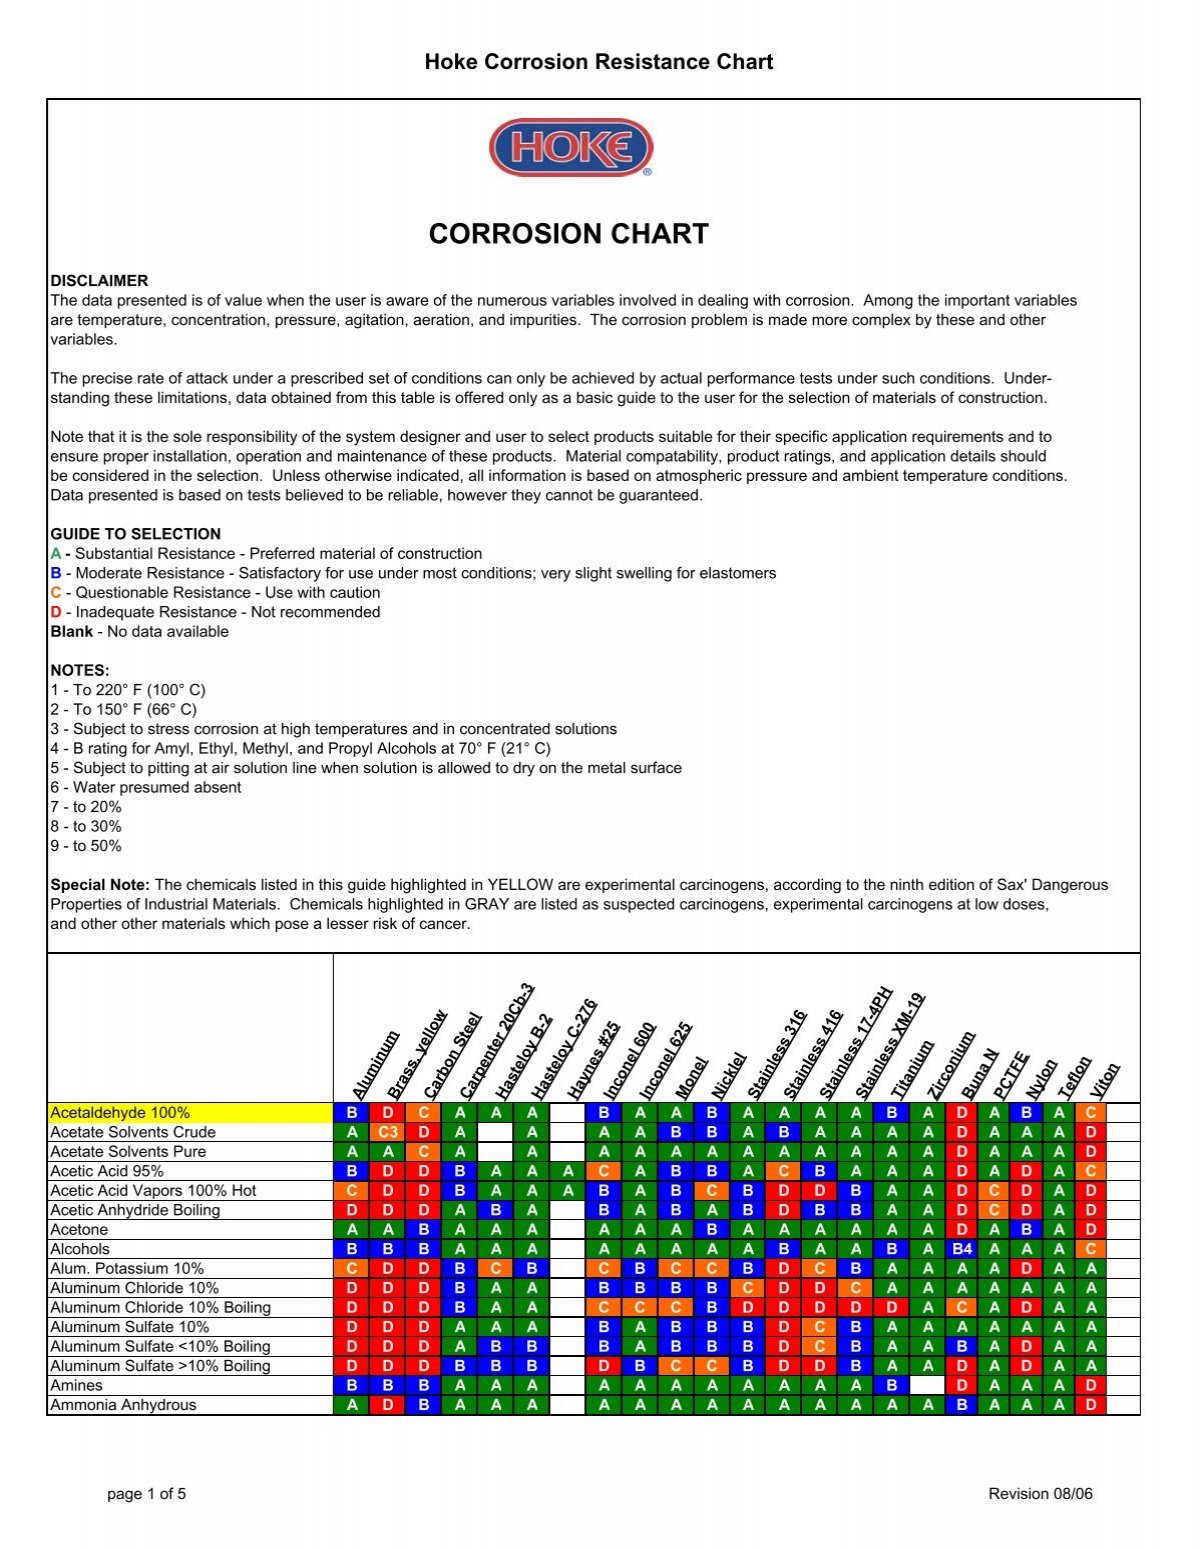 Inconel Corrosion Resistance Chart